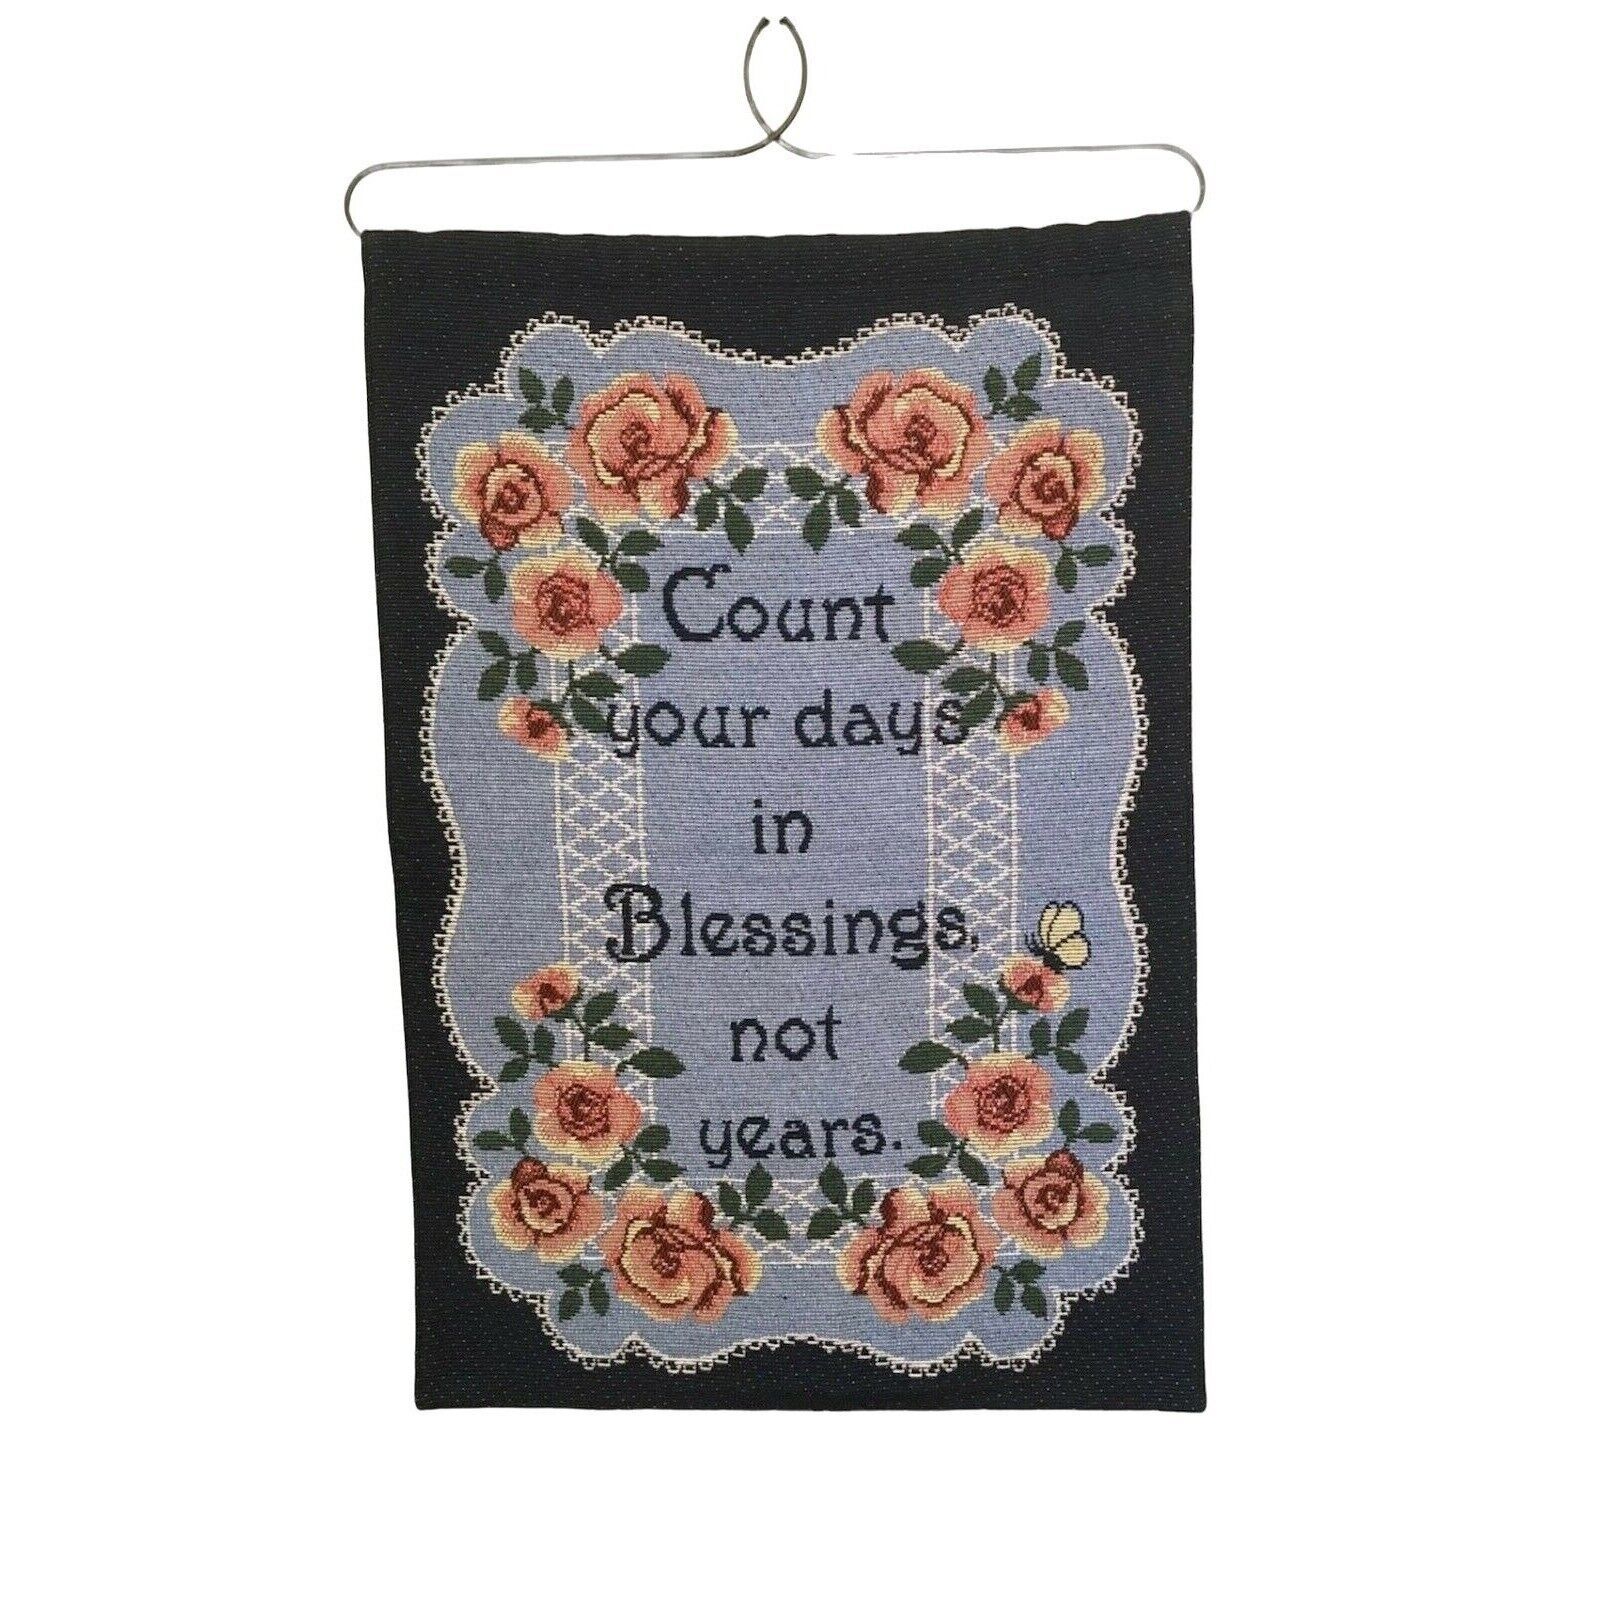 Blessings Inspirational Tapestry Wall Hanging Art Count Your Days In Blessings - $16.83